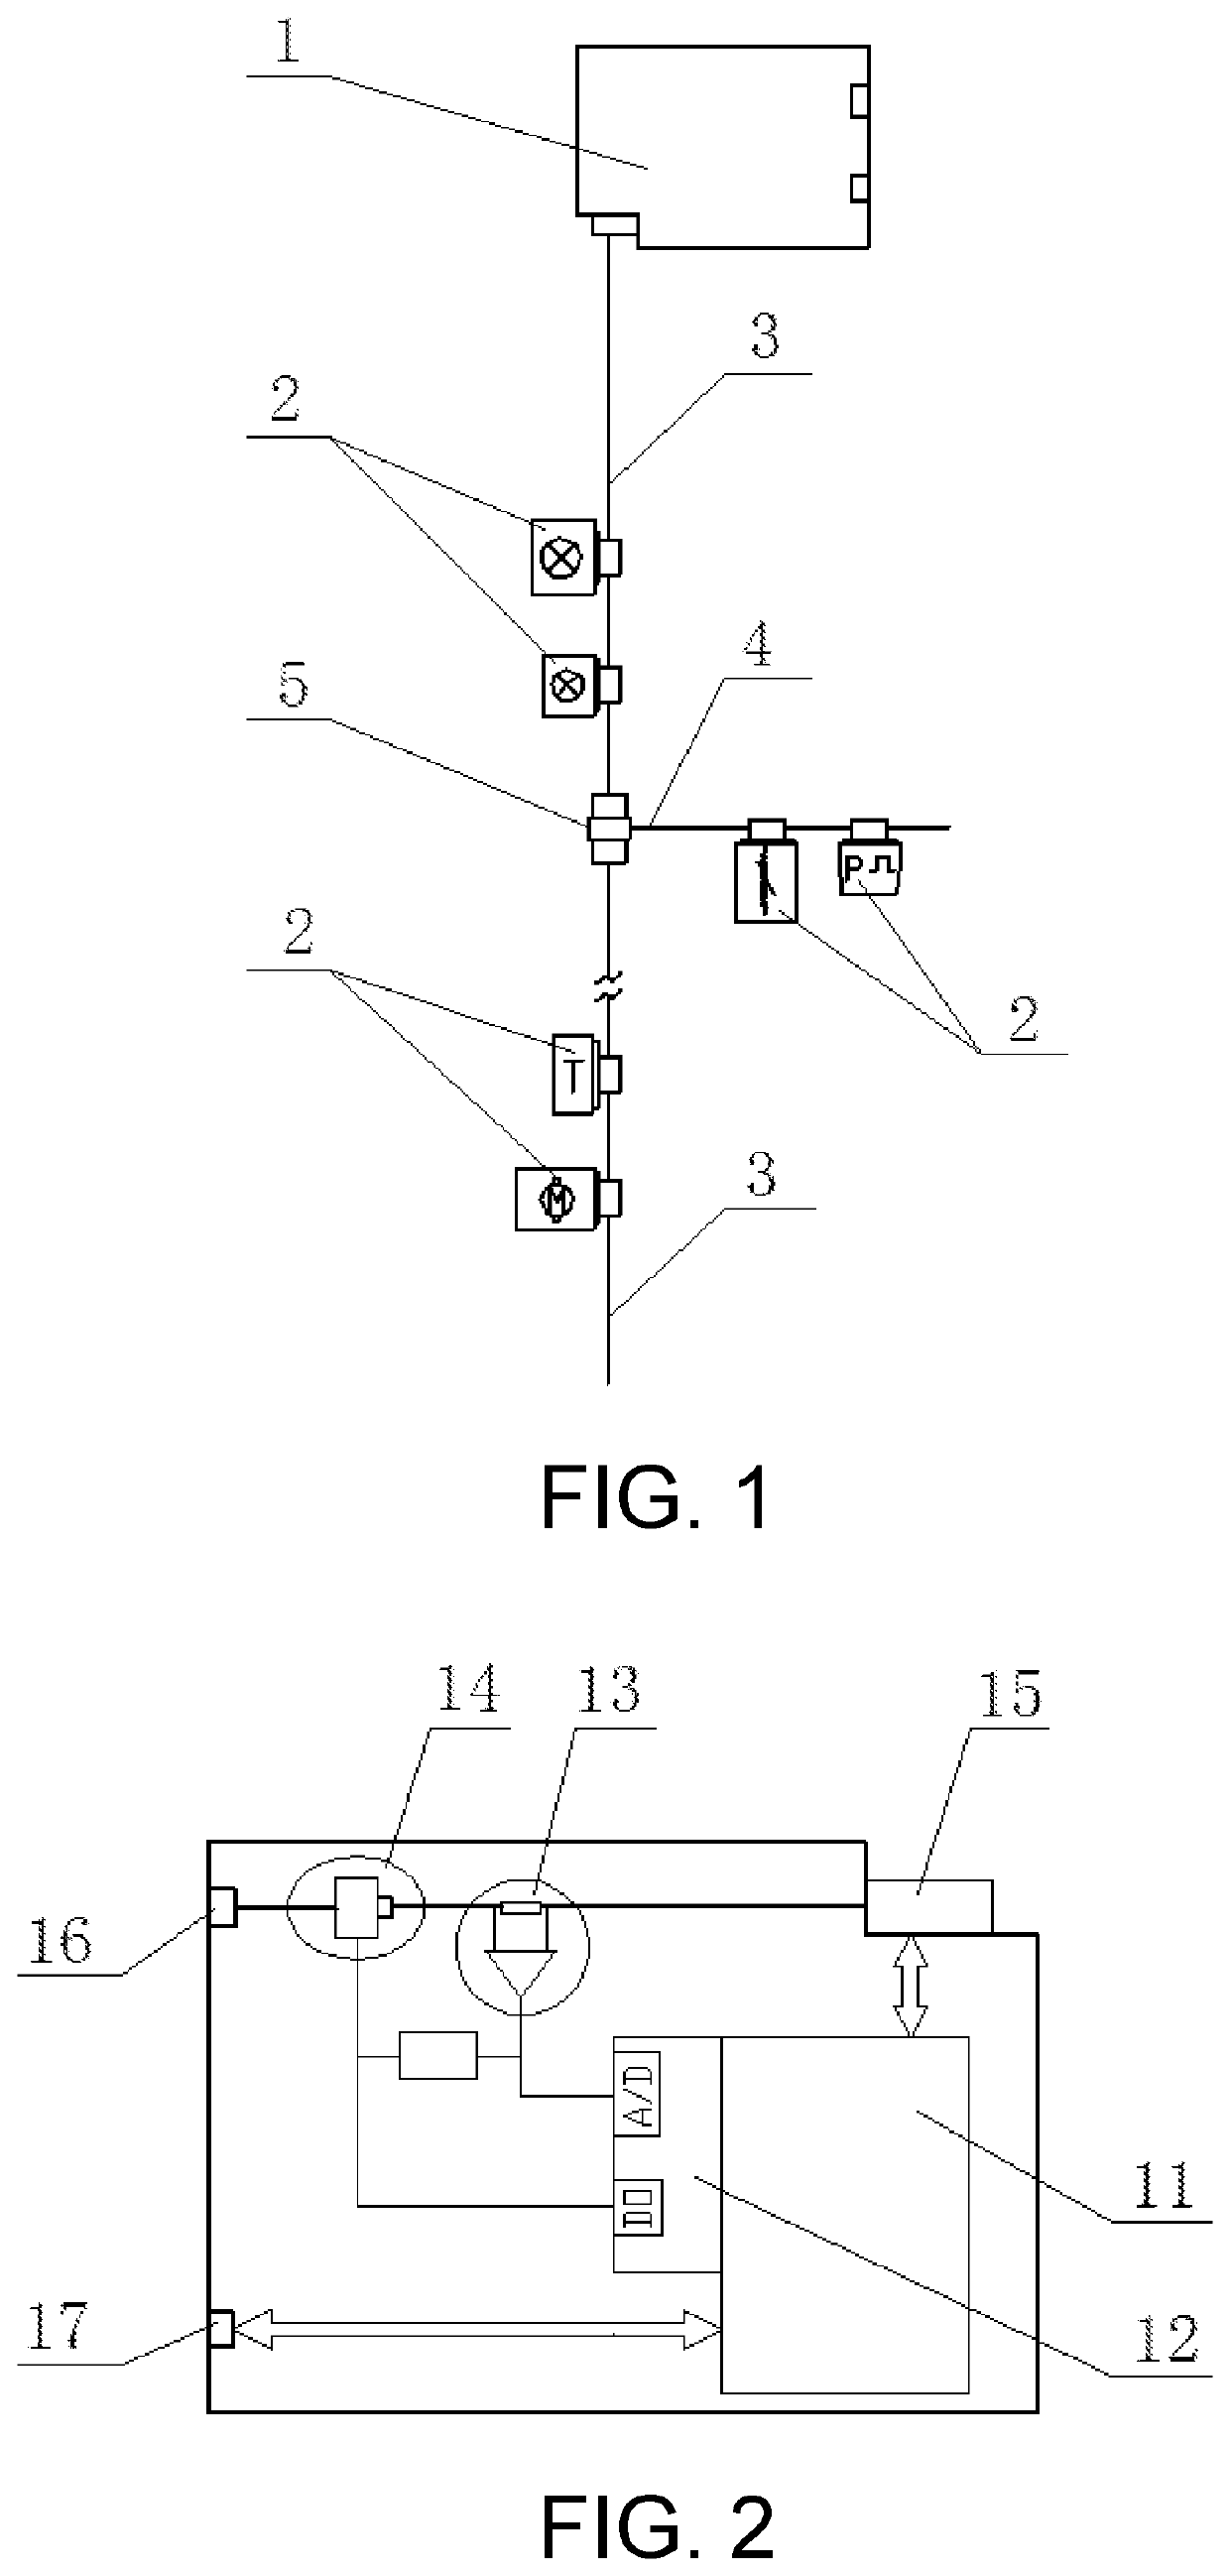 Vehicle-mounted local network system